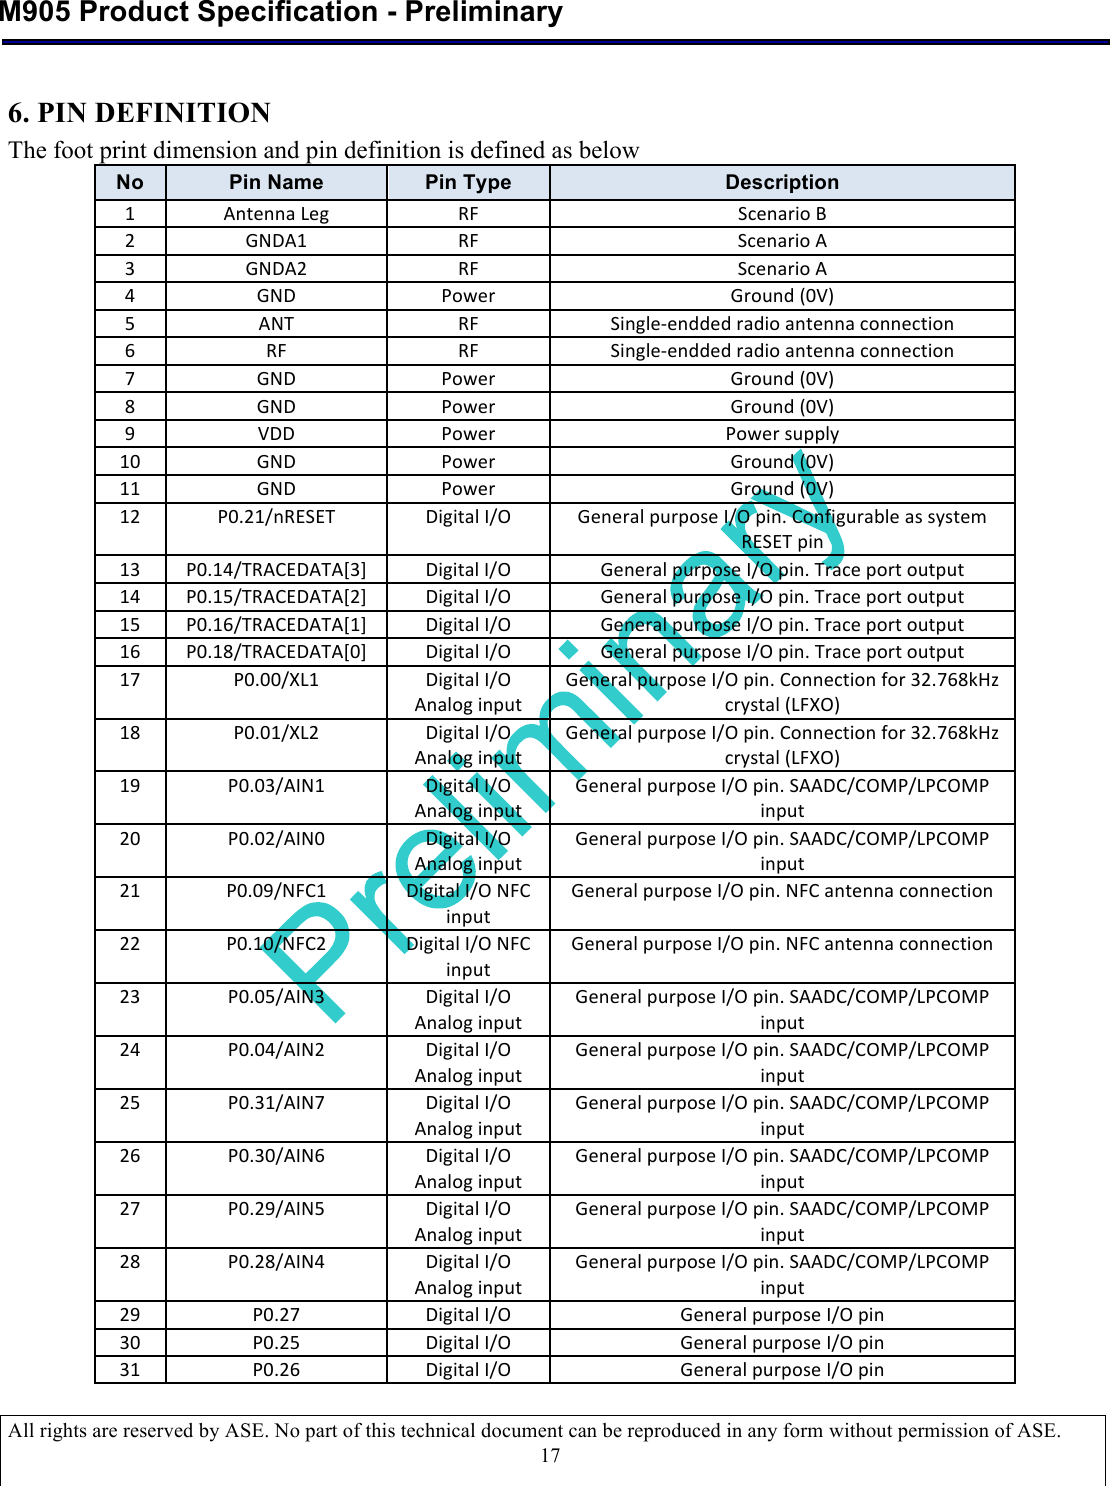  M905 Product Specification - Preliminary  All rights are reserved by ASE. No part of this technical document can be reproduced in any form without permission of ASE.  17 6. PIN DEFINITION  The foot print dimension and pin definition is defined as below No Pin Name Pin Type Description 1!Antenna!Leg!RF!Scenario!B!2!GNDA1!RF!Scenario!A!3!GNDA2!RF!Scenario!A!4!GND!Power!Ground!(0V)!5!ANT!RF!Single-endded!radio!antenna!connection!6!RF!RF!Single-endded!radio!antenna!connection!7!GND!Power!Ground!(0V)!8!GND!Power!Ground!(0V)!9!VDD!Power!Power!supply!10!GND!Power!Ground!(0V)!11!GND!Power!Ground!(0V)!12!P0.21/nRESET!Digital!I/O!General!purpose!I/O!pin.!Configurable!as!system!RESET!pin!13!P0.14/TRACEDATA[3]!Digital!I/O!General!purpose!I/O!pin.!Trace!port!output!14!P0.15/TRACEDATA[2]!Digital!I/O!General!purpose!I/O!pin.!Trace!port!output!15!P0.16/TRACEDATA[1]!Digital!I/O!General!purpose!I/O!pin.!Trace!port!output!16!P0.18/TRACEDATA[0]!Digital!I/O!General!purpose!I/O!pin.!Trace!port!output!17!P0.00/XL1!Digital!I/O!Analog!input!General!purpose!I/O!pin.!Connection!for!32.768kHz!crystal!(LFXO)!18!P0.01/XL2!Digital!I/O!Analog!input!General!purpose!I/O!pin.!Connection!for!32.768kHz!crystal!(LFXO)!19!P0.03/AIN1!Digital!I/O!Analog!input!General!purpose!I/O!pin.!SAADC/COMP/LPCOMP!input!20!P0.02/AIN0!Digital!I/O!Analog!input!General!purpose!I/O!pin.!SAADC/COMP/LPCOMP!input!21!P0.09/NFC1!Digital!I/O!NFC!input!General!purpose!I/O!pin.!NFC!antenna!connection!22!P0.10/NFC2!Digital!I/O!NFC!input!General!purpose!I/O!pin.!NFC!antenna!connection!23!P0.05/AIN3!Digital!I/O!Analog!input!General!purpose!I/O!pin.!SAADC/COMP/LPCOMP!input!24!P0.04/AIN2!Digital!I/O!Analog!input!General!purpose!I/O!pin.!SAADC/COMP/LPCOMP!input!25!P0.31/AIN7!Digital!I/O!Analog!input!General!purpose!I/O!pin.!SAADC/COMP/LPCOMP!input!26!P0.30/AIN6!Digital!I/O!Analog!input!General!purpose!I/O!pin.!SAADC/COMP/LPCOMP!input!27!P0.29/AIN5!Digital!I/O!Analog!input!General!purpose!I/O!pin.!SAADC/COMP/LPCOMP!input!28!P0.28/AIN4!Digital!I/O!Analog!input!General!purpose!I/O!pin.!SAADC/COMP/LPCOMP!input!29!P0.27!Digital!I/O!General!purpose!I/O!pin!30!P0.25!Digital!I/O!General!purpose!I/O!pin!31!P0.26!Digital!I/O!General!purpose!I/O!pin!